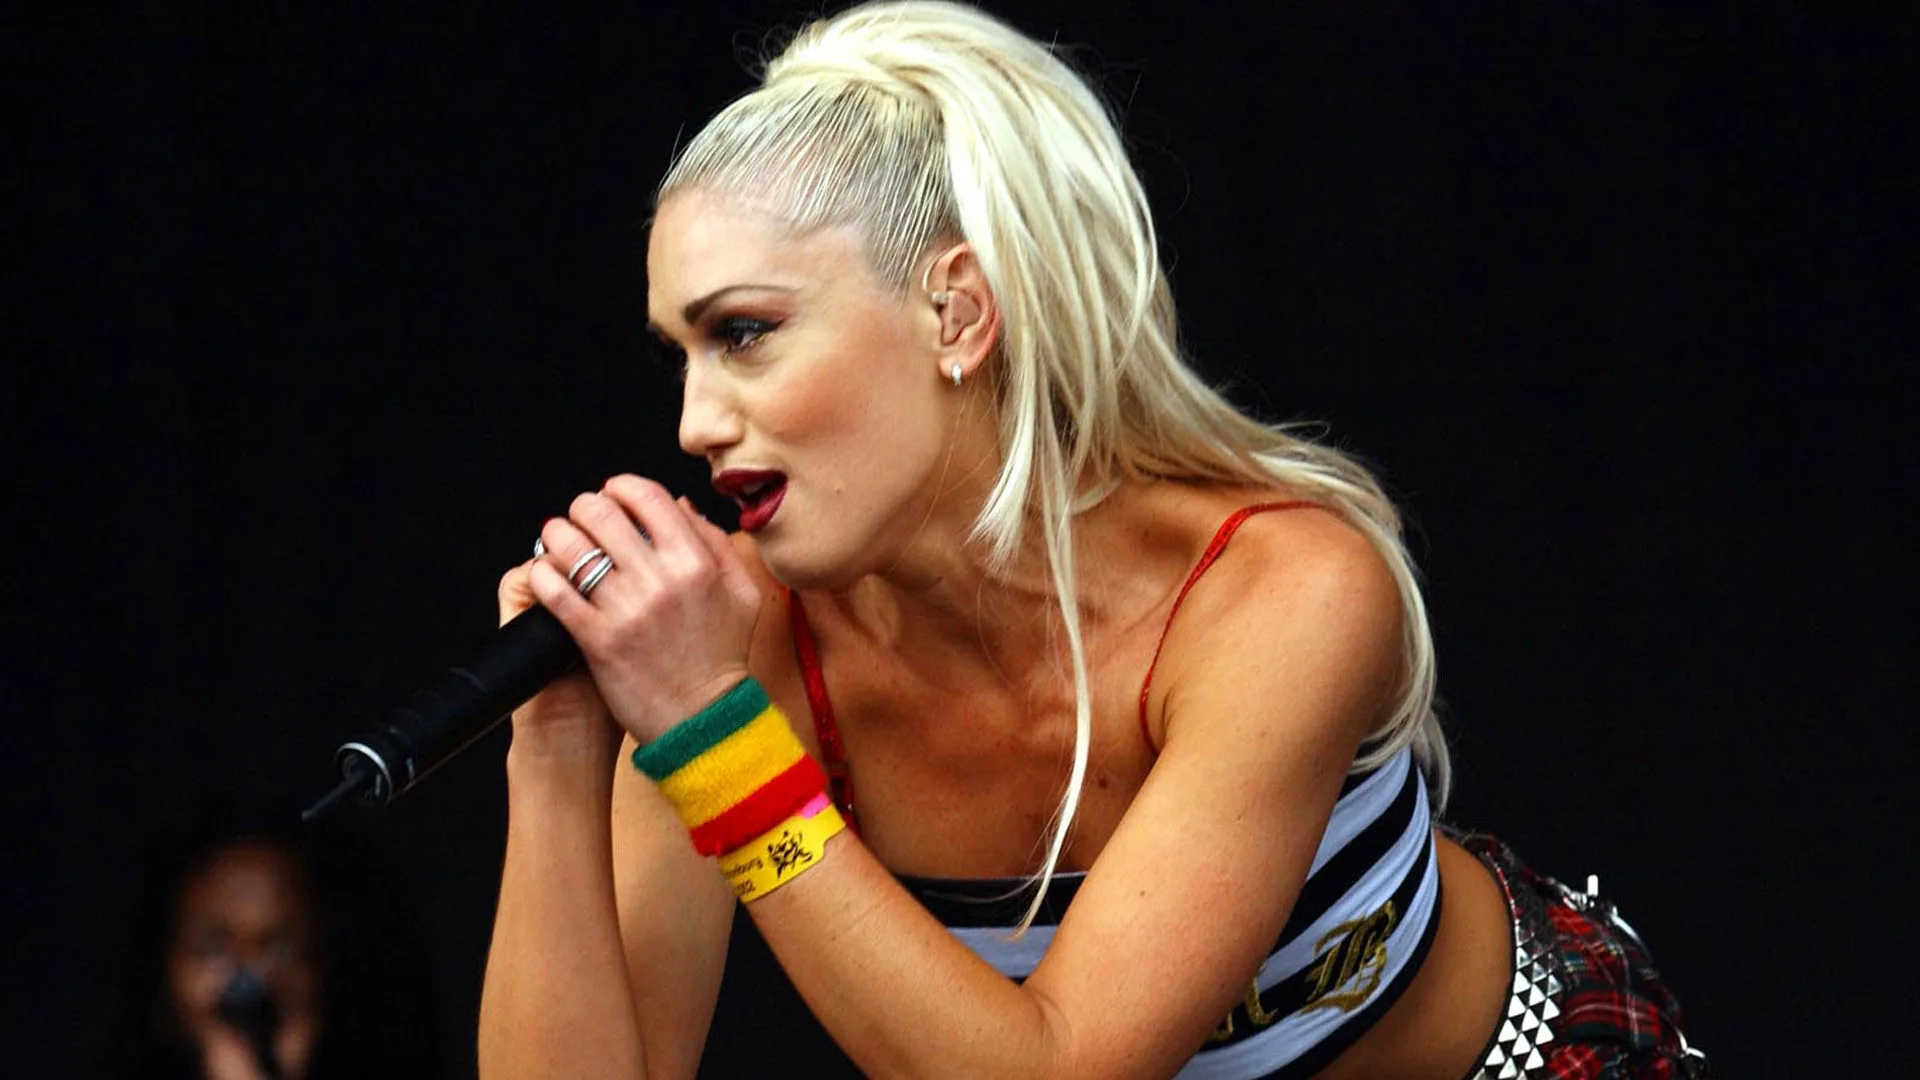 A photograph of Gwen Stefani singing into a mic wearing colourful bands on her wrist and a striped top.